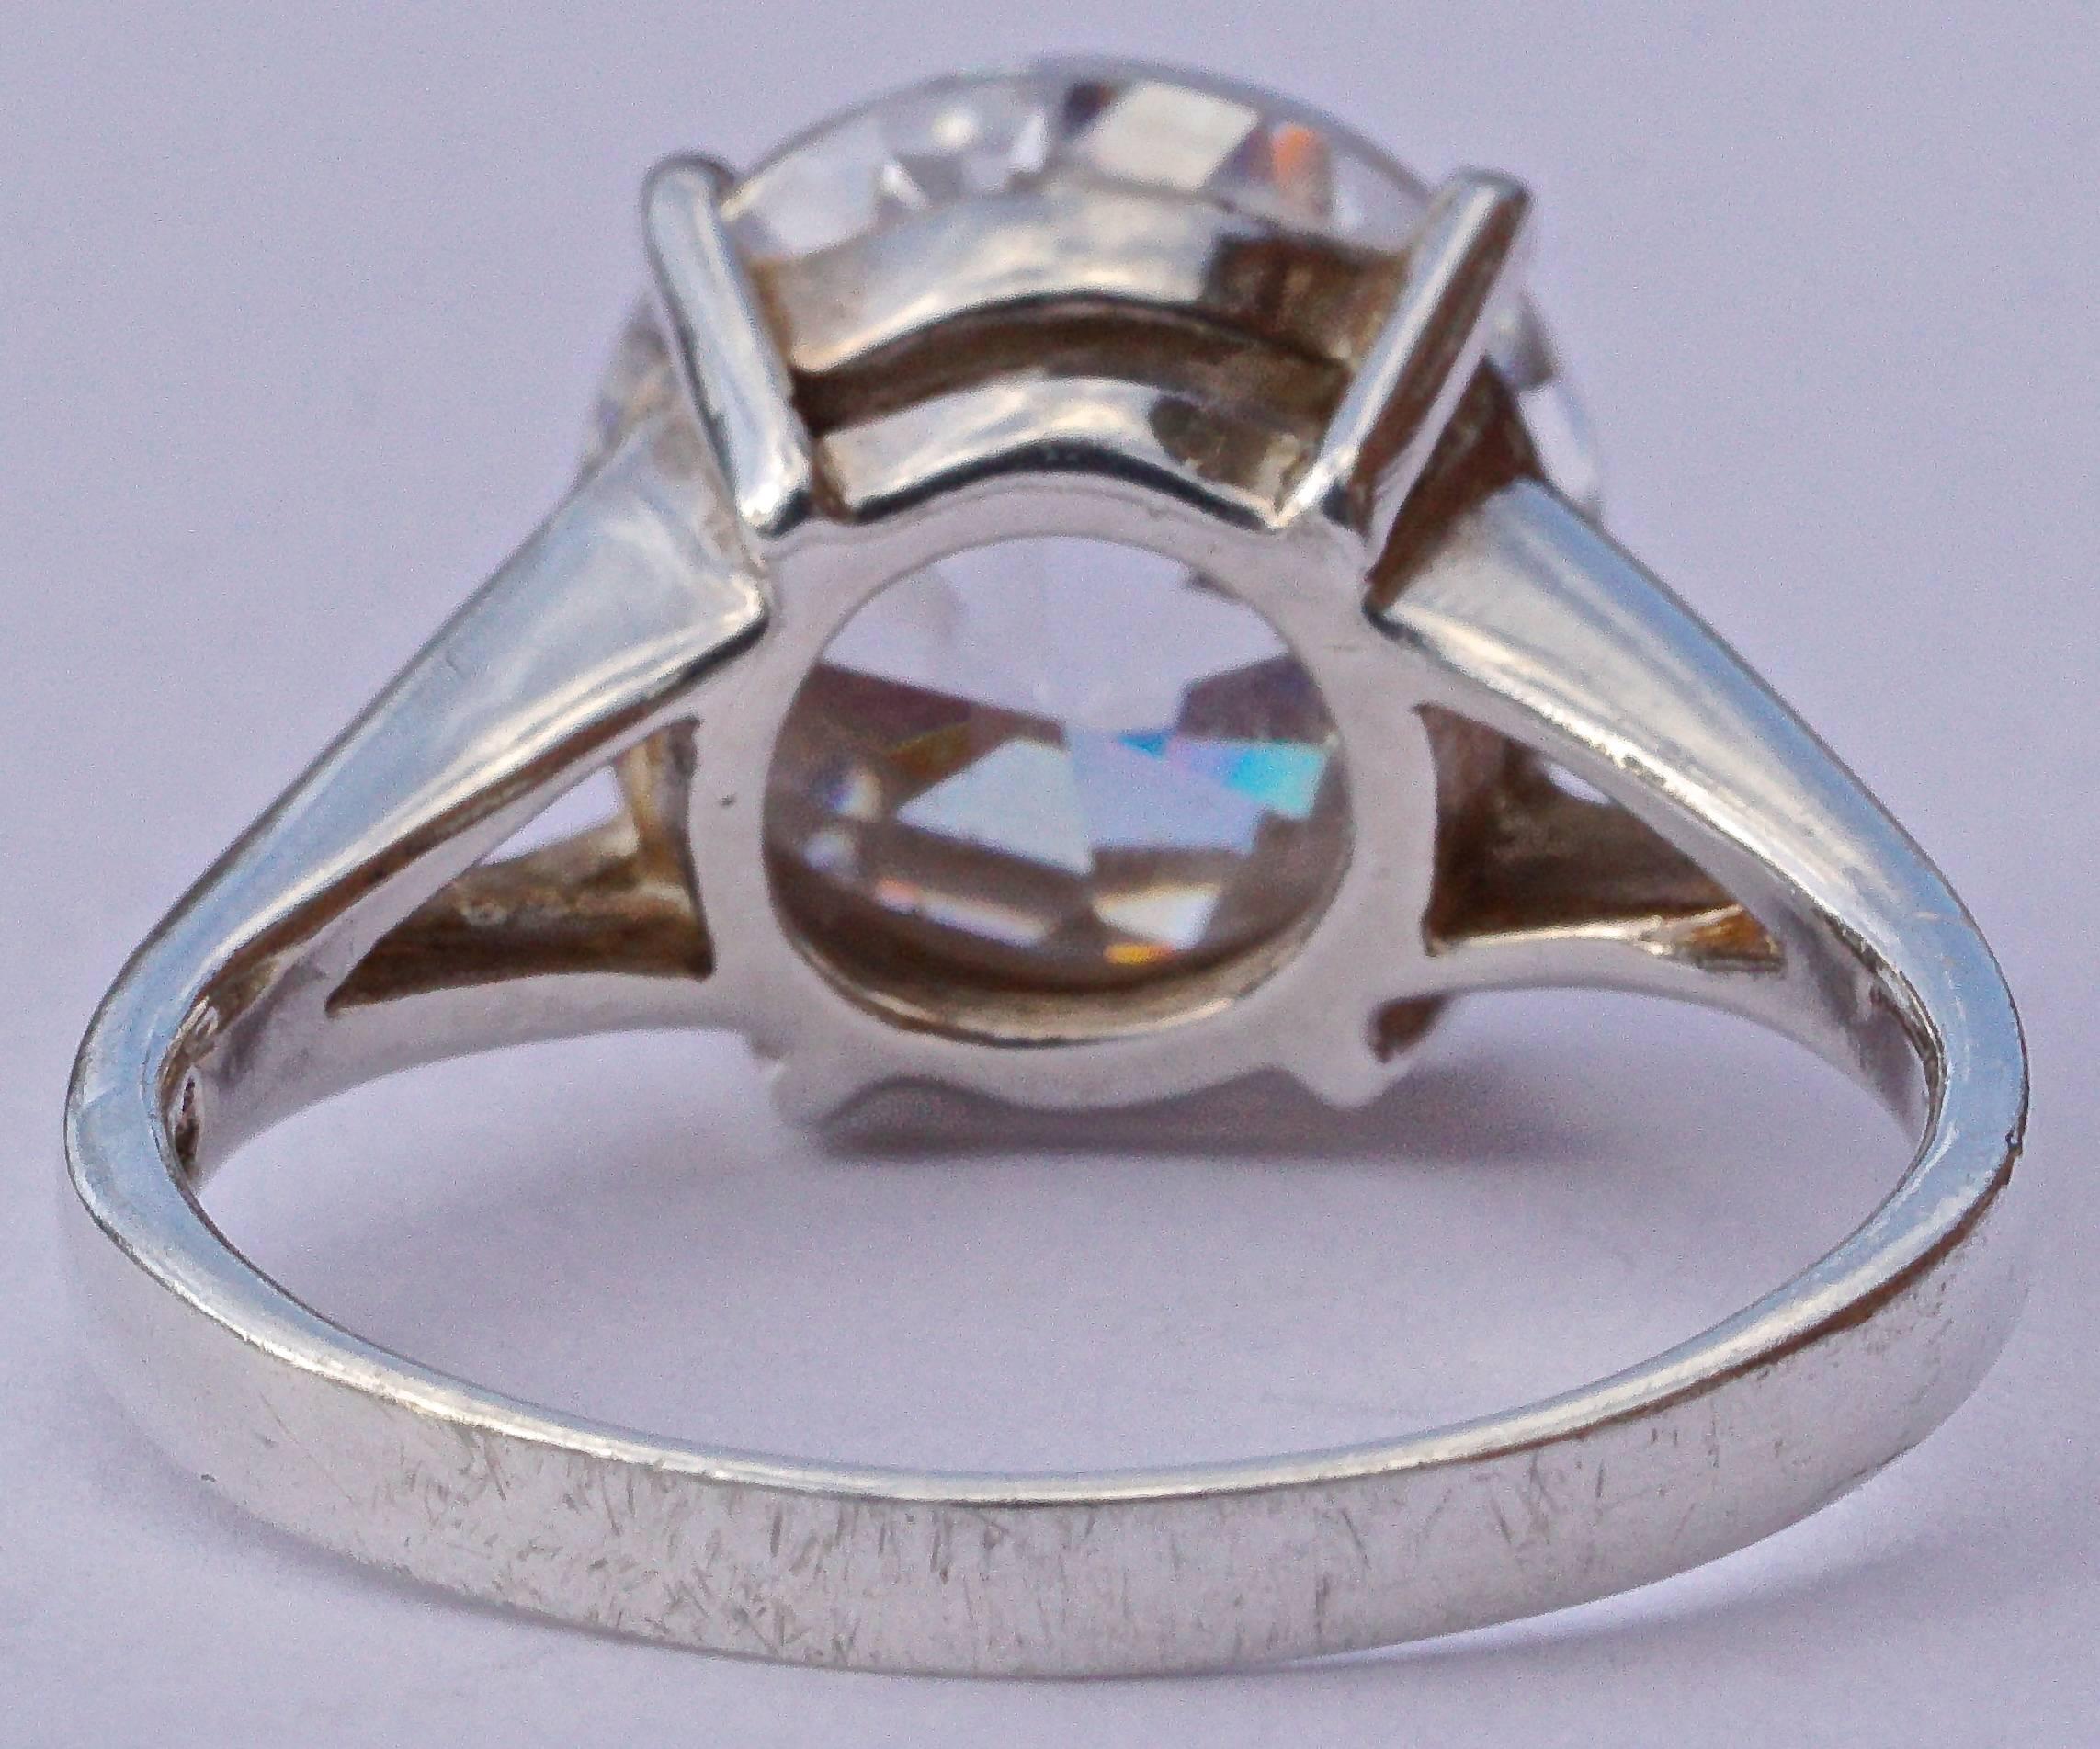 Silver and faceted clear stone solitaire ring, size UK Q 1/2, US 8 1/4. The large solitaire jewel is 1.2cm, 1/2 inch diameter, and the setting is 5mm, 1/5 inch depth. The inside band is stamped 925.

This is a fabulous sparkling vintage ring, for